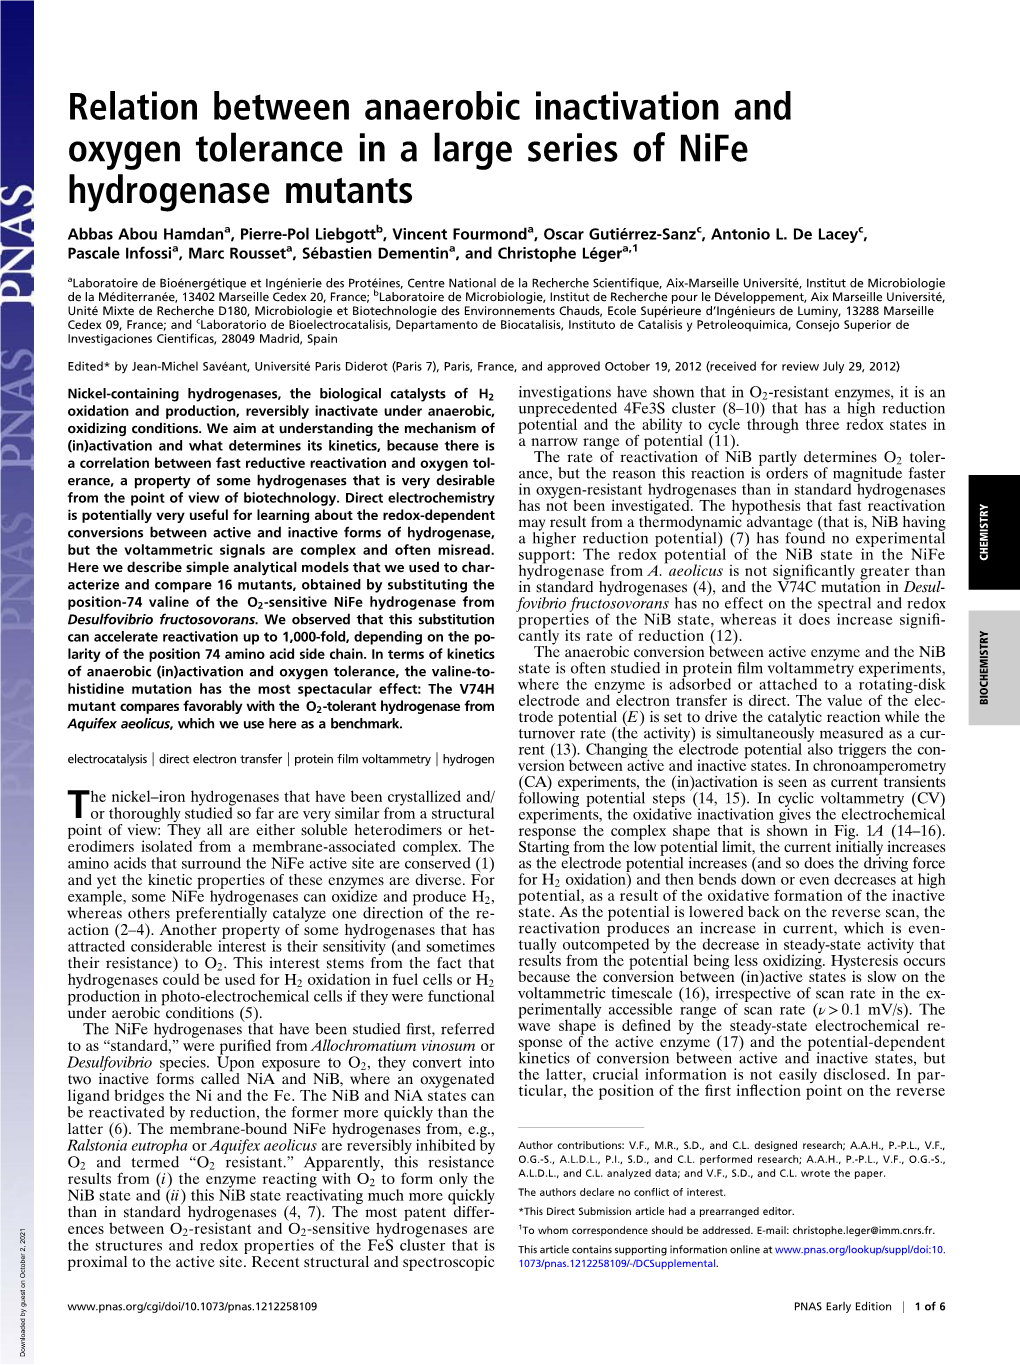 Relation Between Anaerobic Inactivation and Oxygen Tolerance in a Large Series of Nife Hydrogenase Mutants